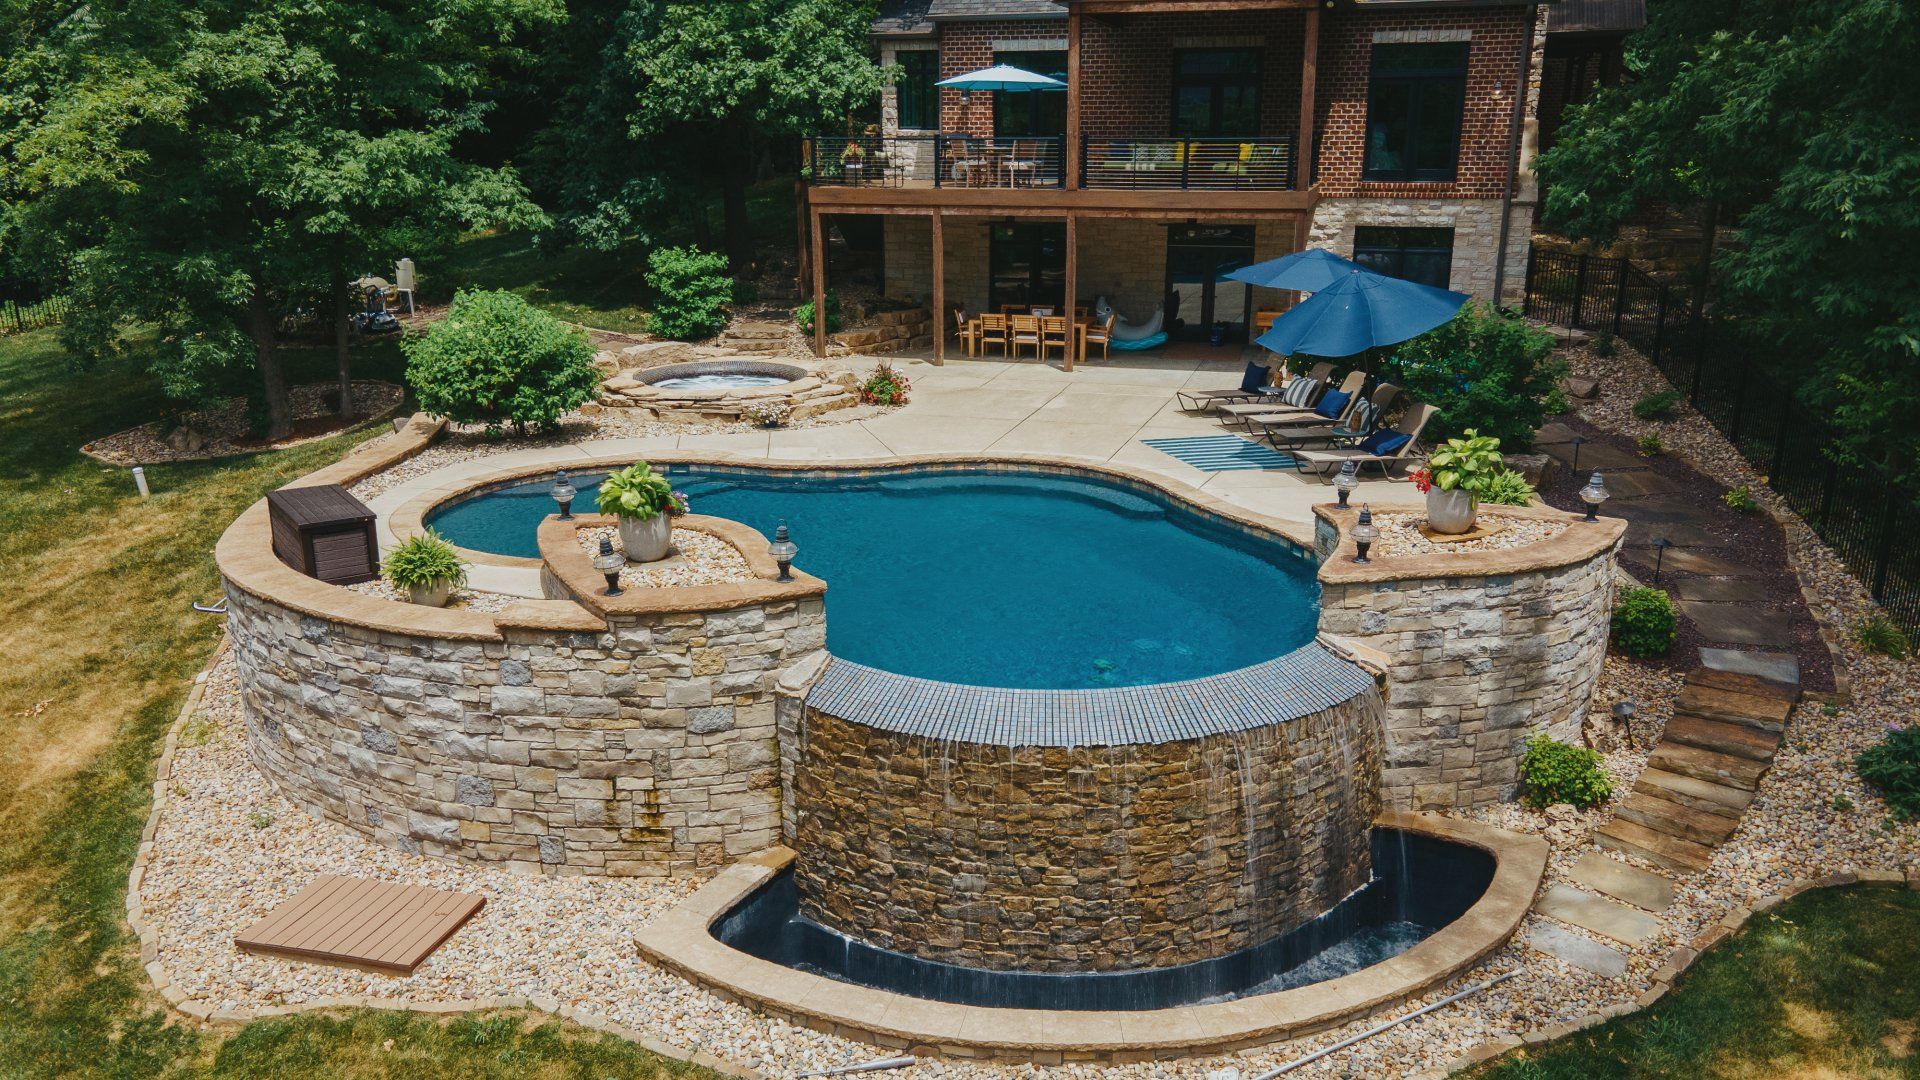 Residential pool with wall waterfall feature